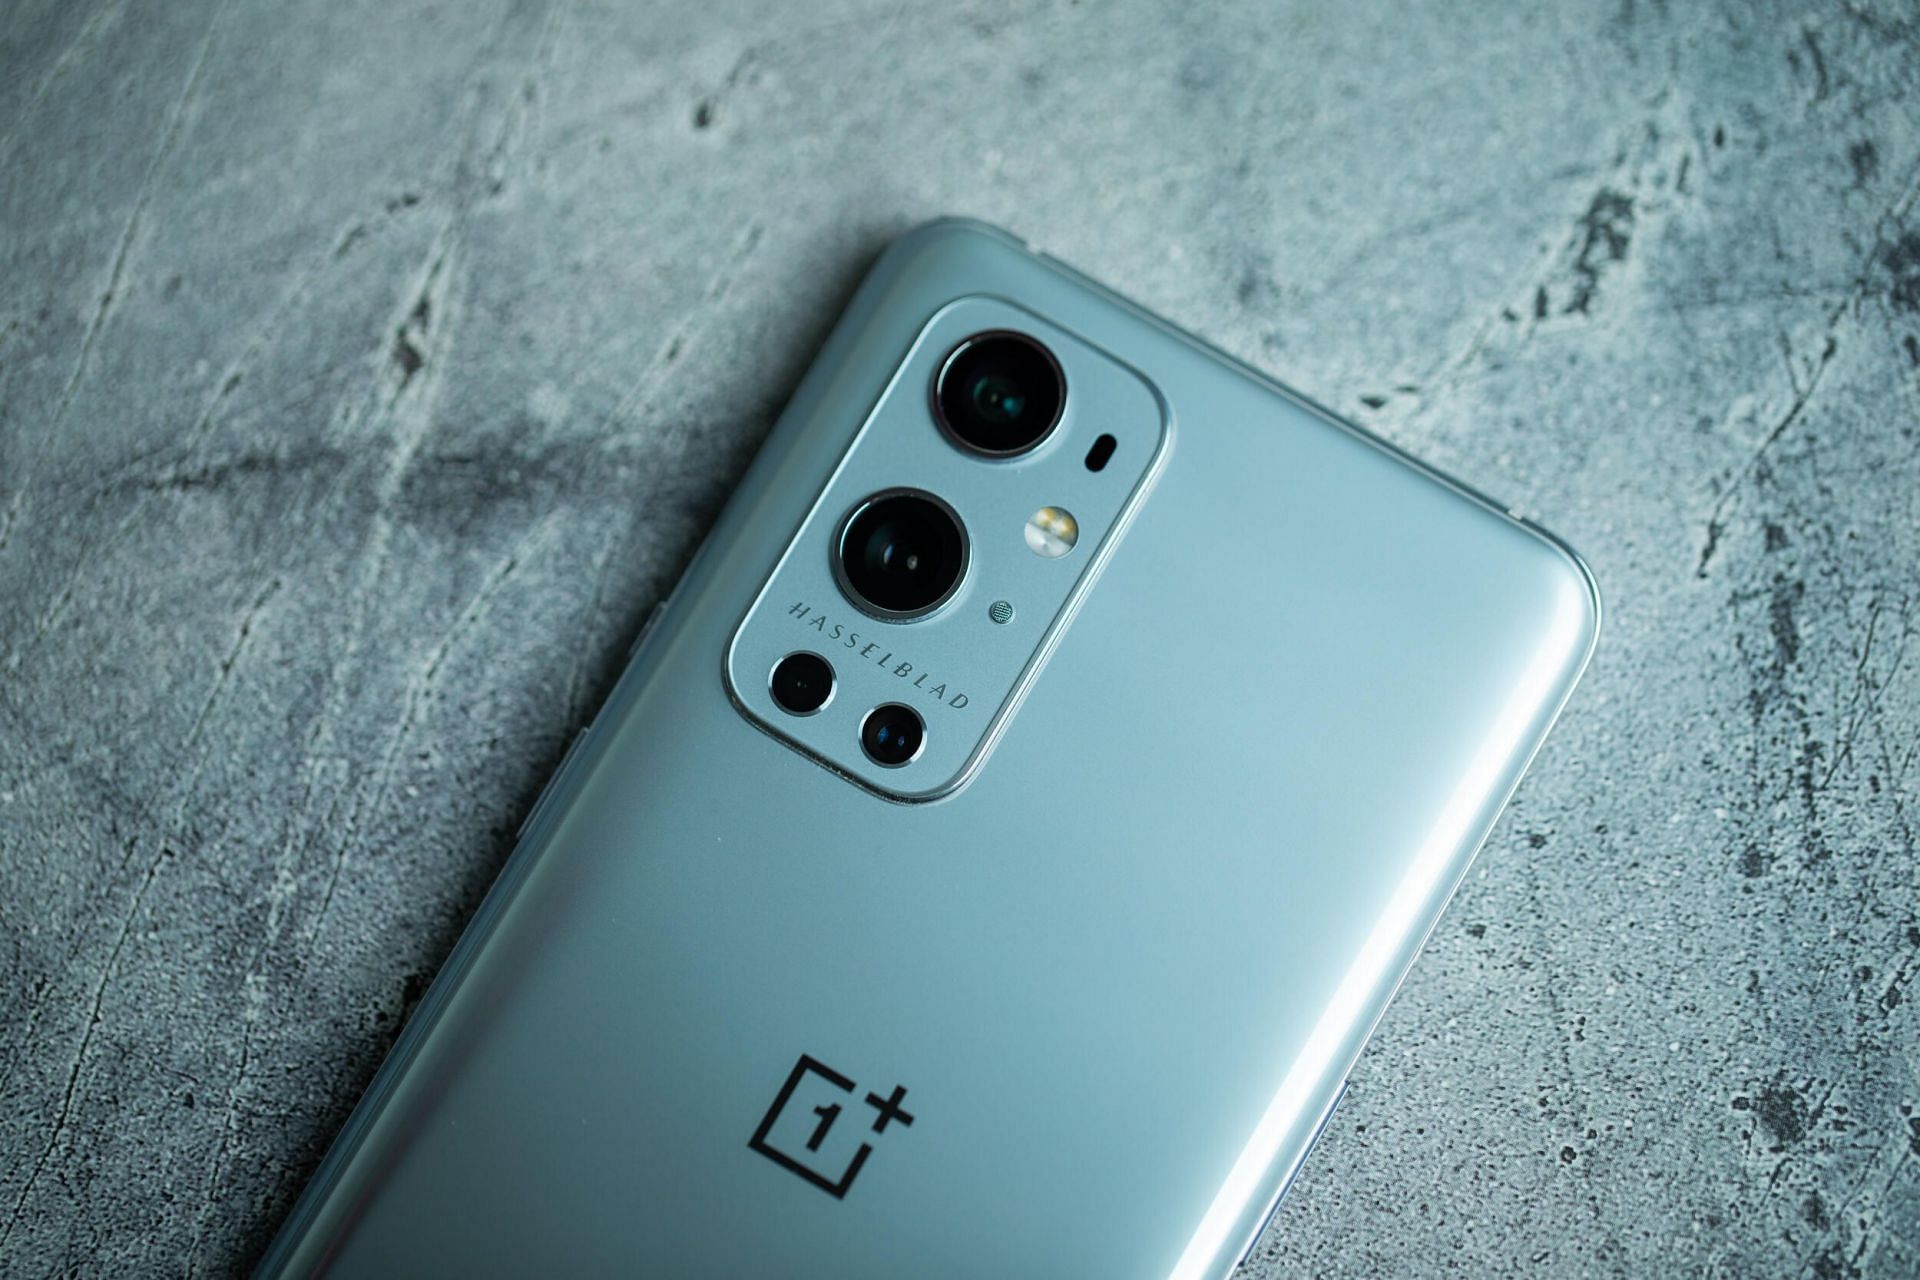 Amazing Android phones like the OnePlus 9 Pro doesn't come with a standard headphone jack (Image via DigitalTrends)